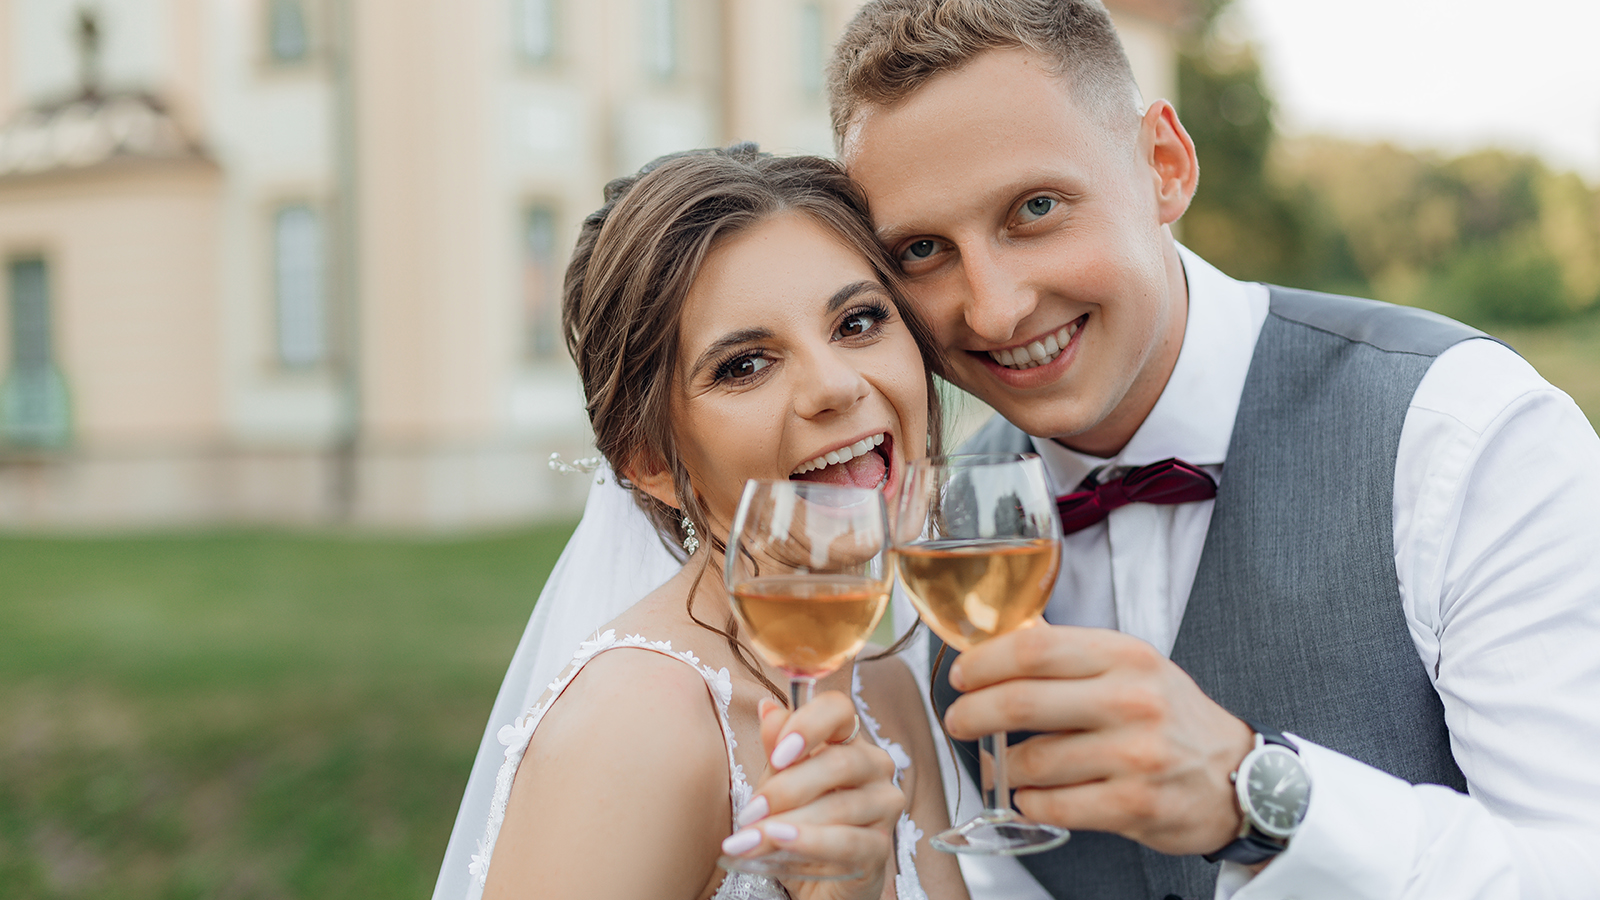 Cheerful, laughing married couple of bride in wedding dress and groom in suit drinking and toasting champagne glasses, having fun on wedding day against new house. Moving new house for young family